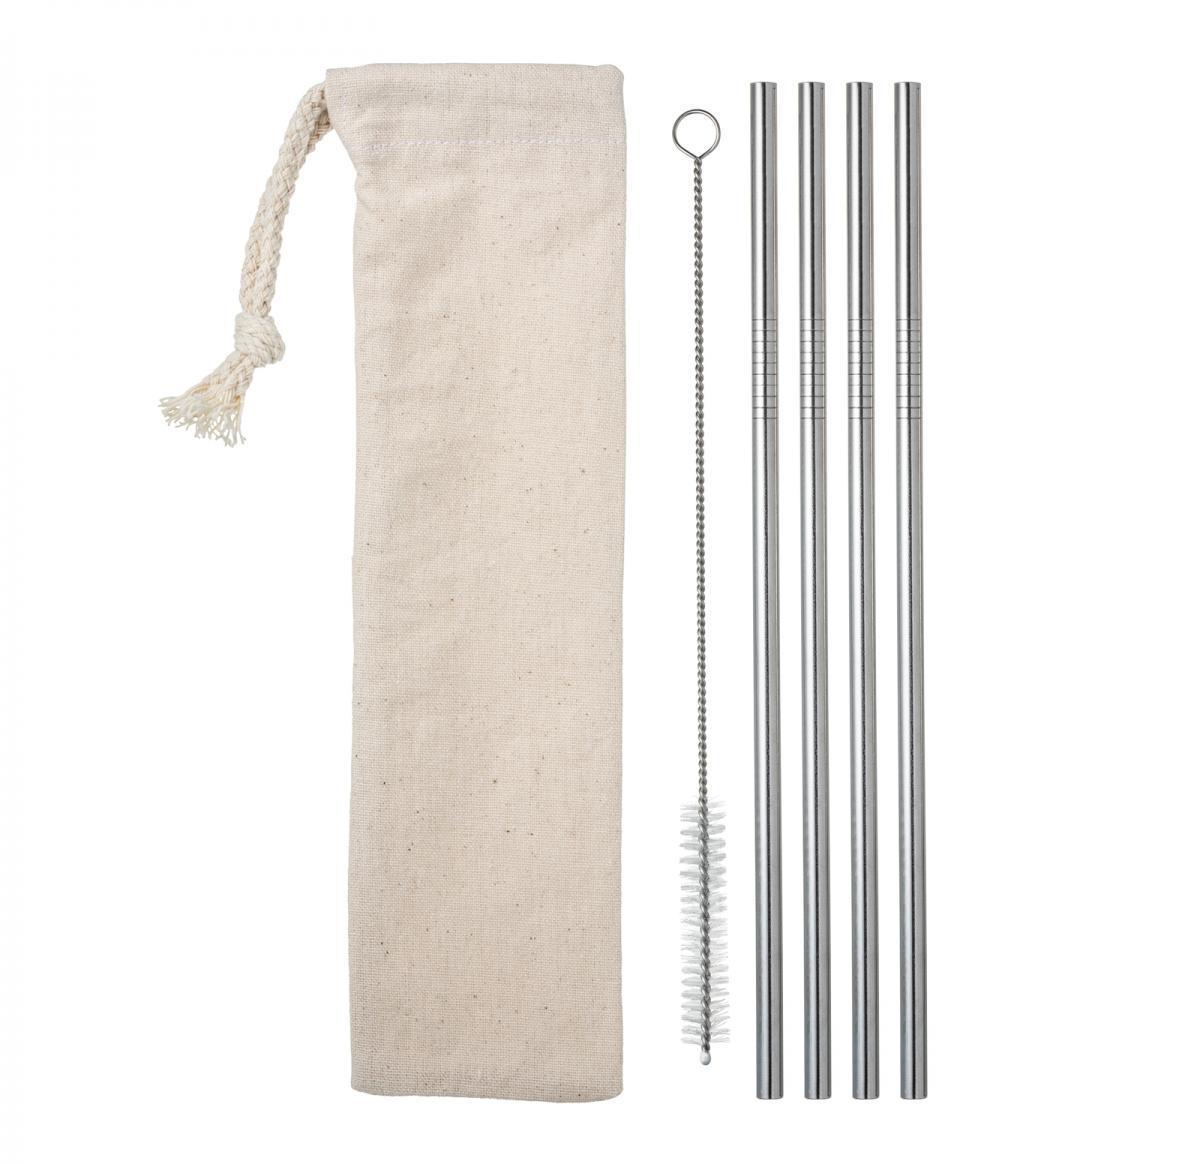 4 Stainless Steel Straws, Cleaning Brush & Pouch